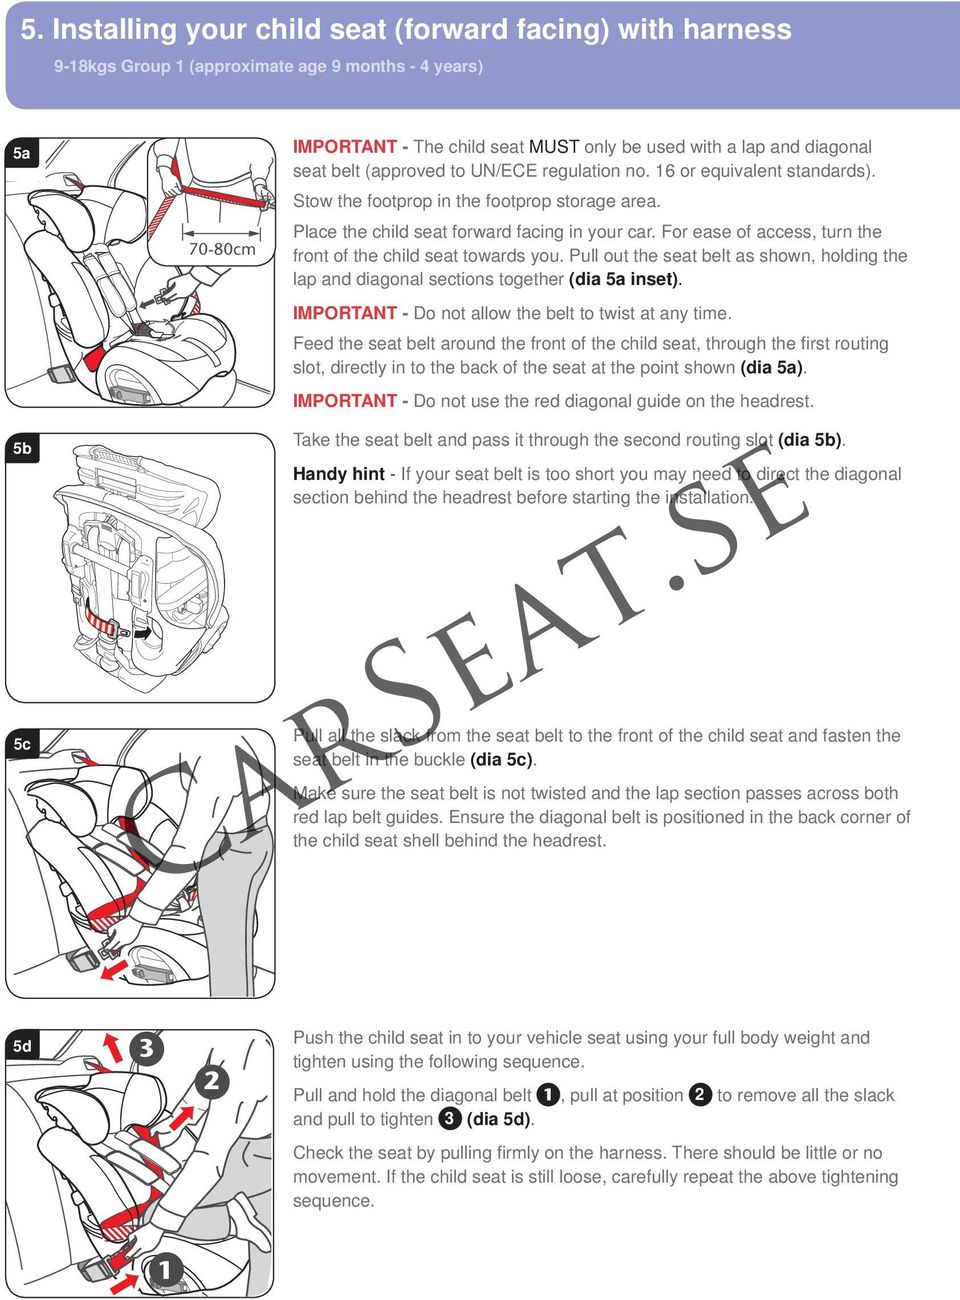 For ease of access, turn the front of the child seat towards you. Pull out the seat belt as shown, holding the lap and diagonal sections together (dia 5a inset).